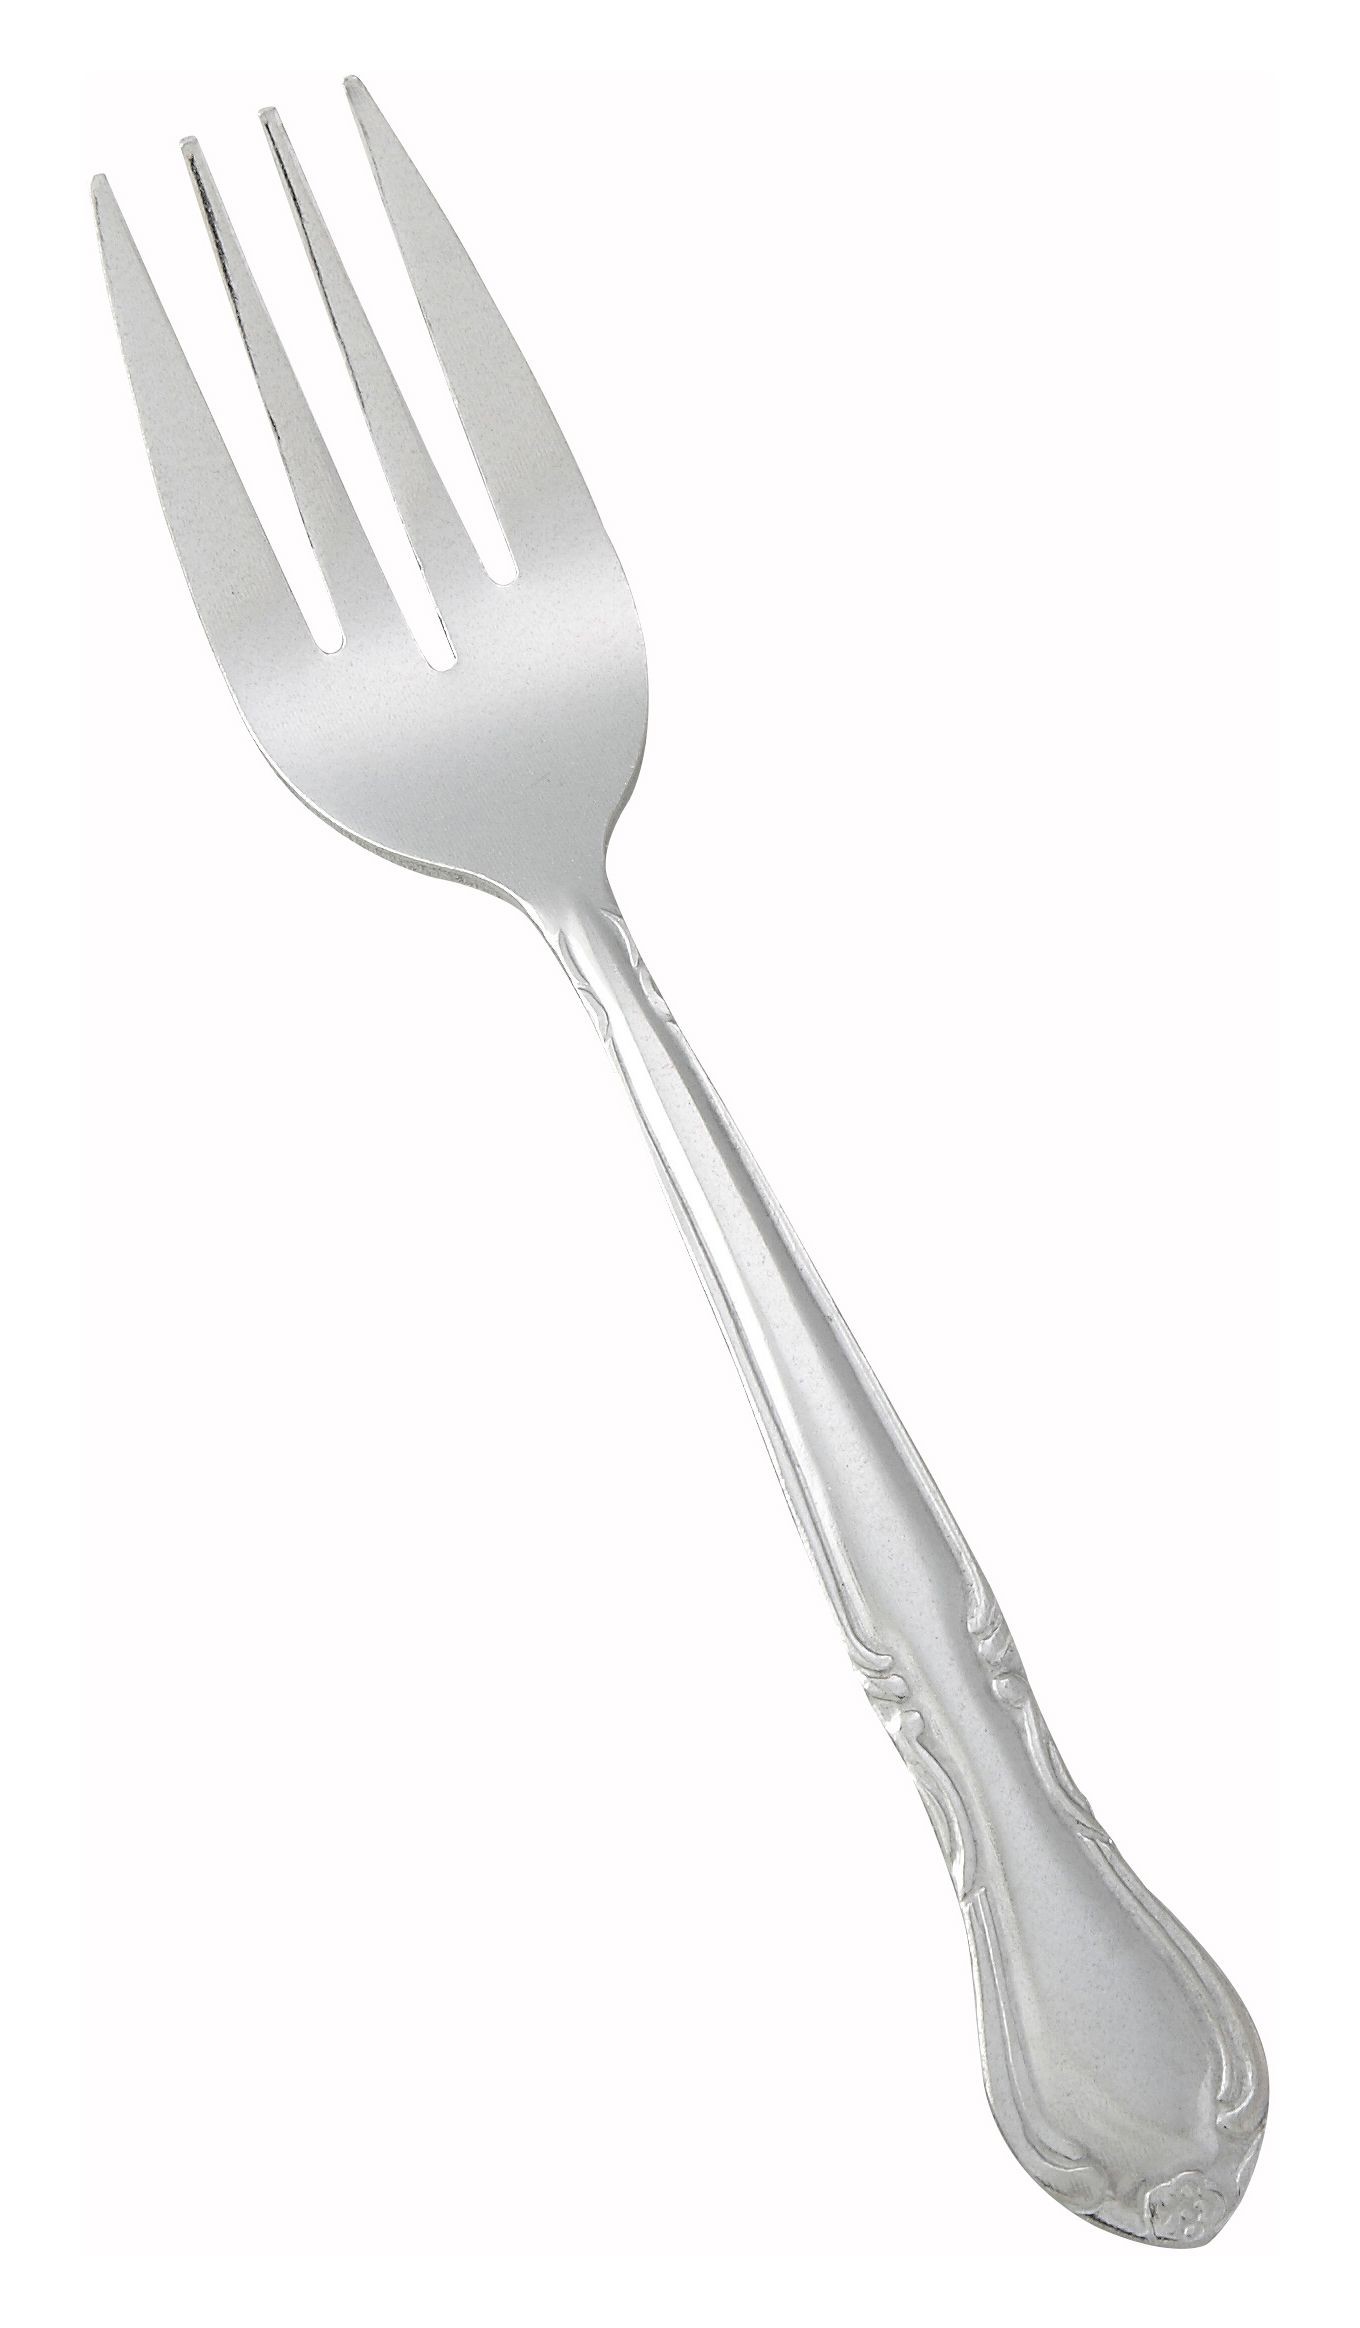 Winco 0004-06 Elegance Heavy Weight Vibro Finish Stainless Steel Salad Fork (12/Pack)